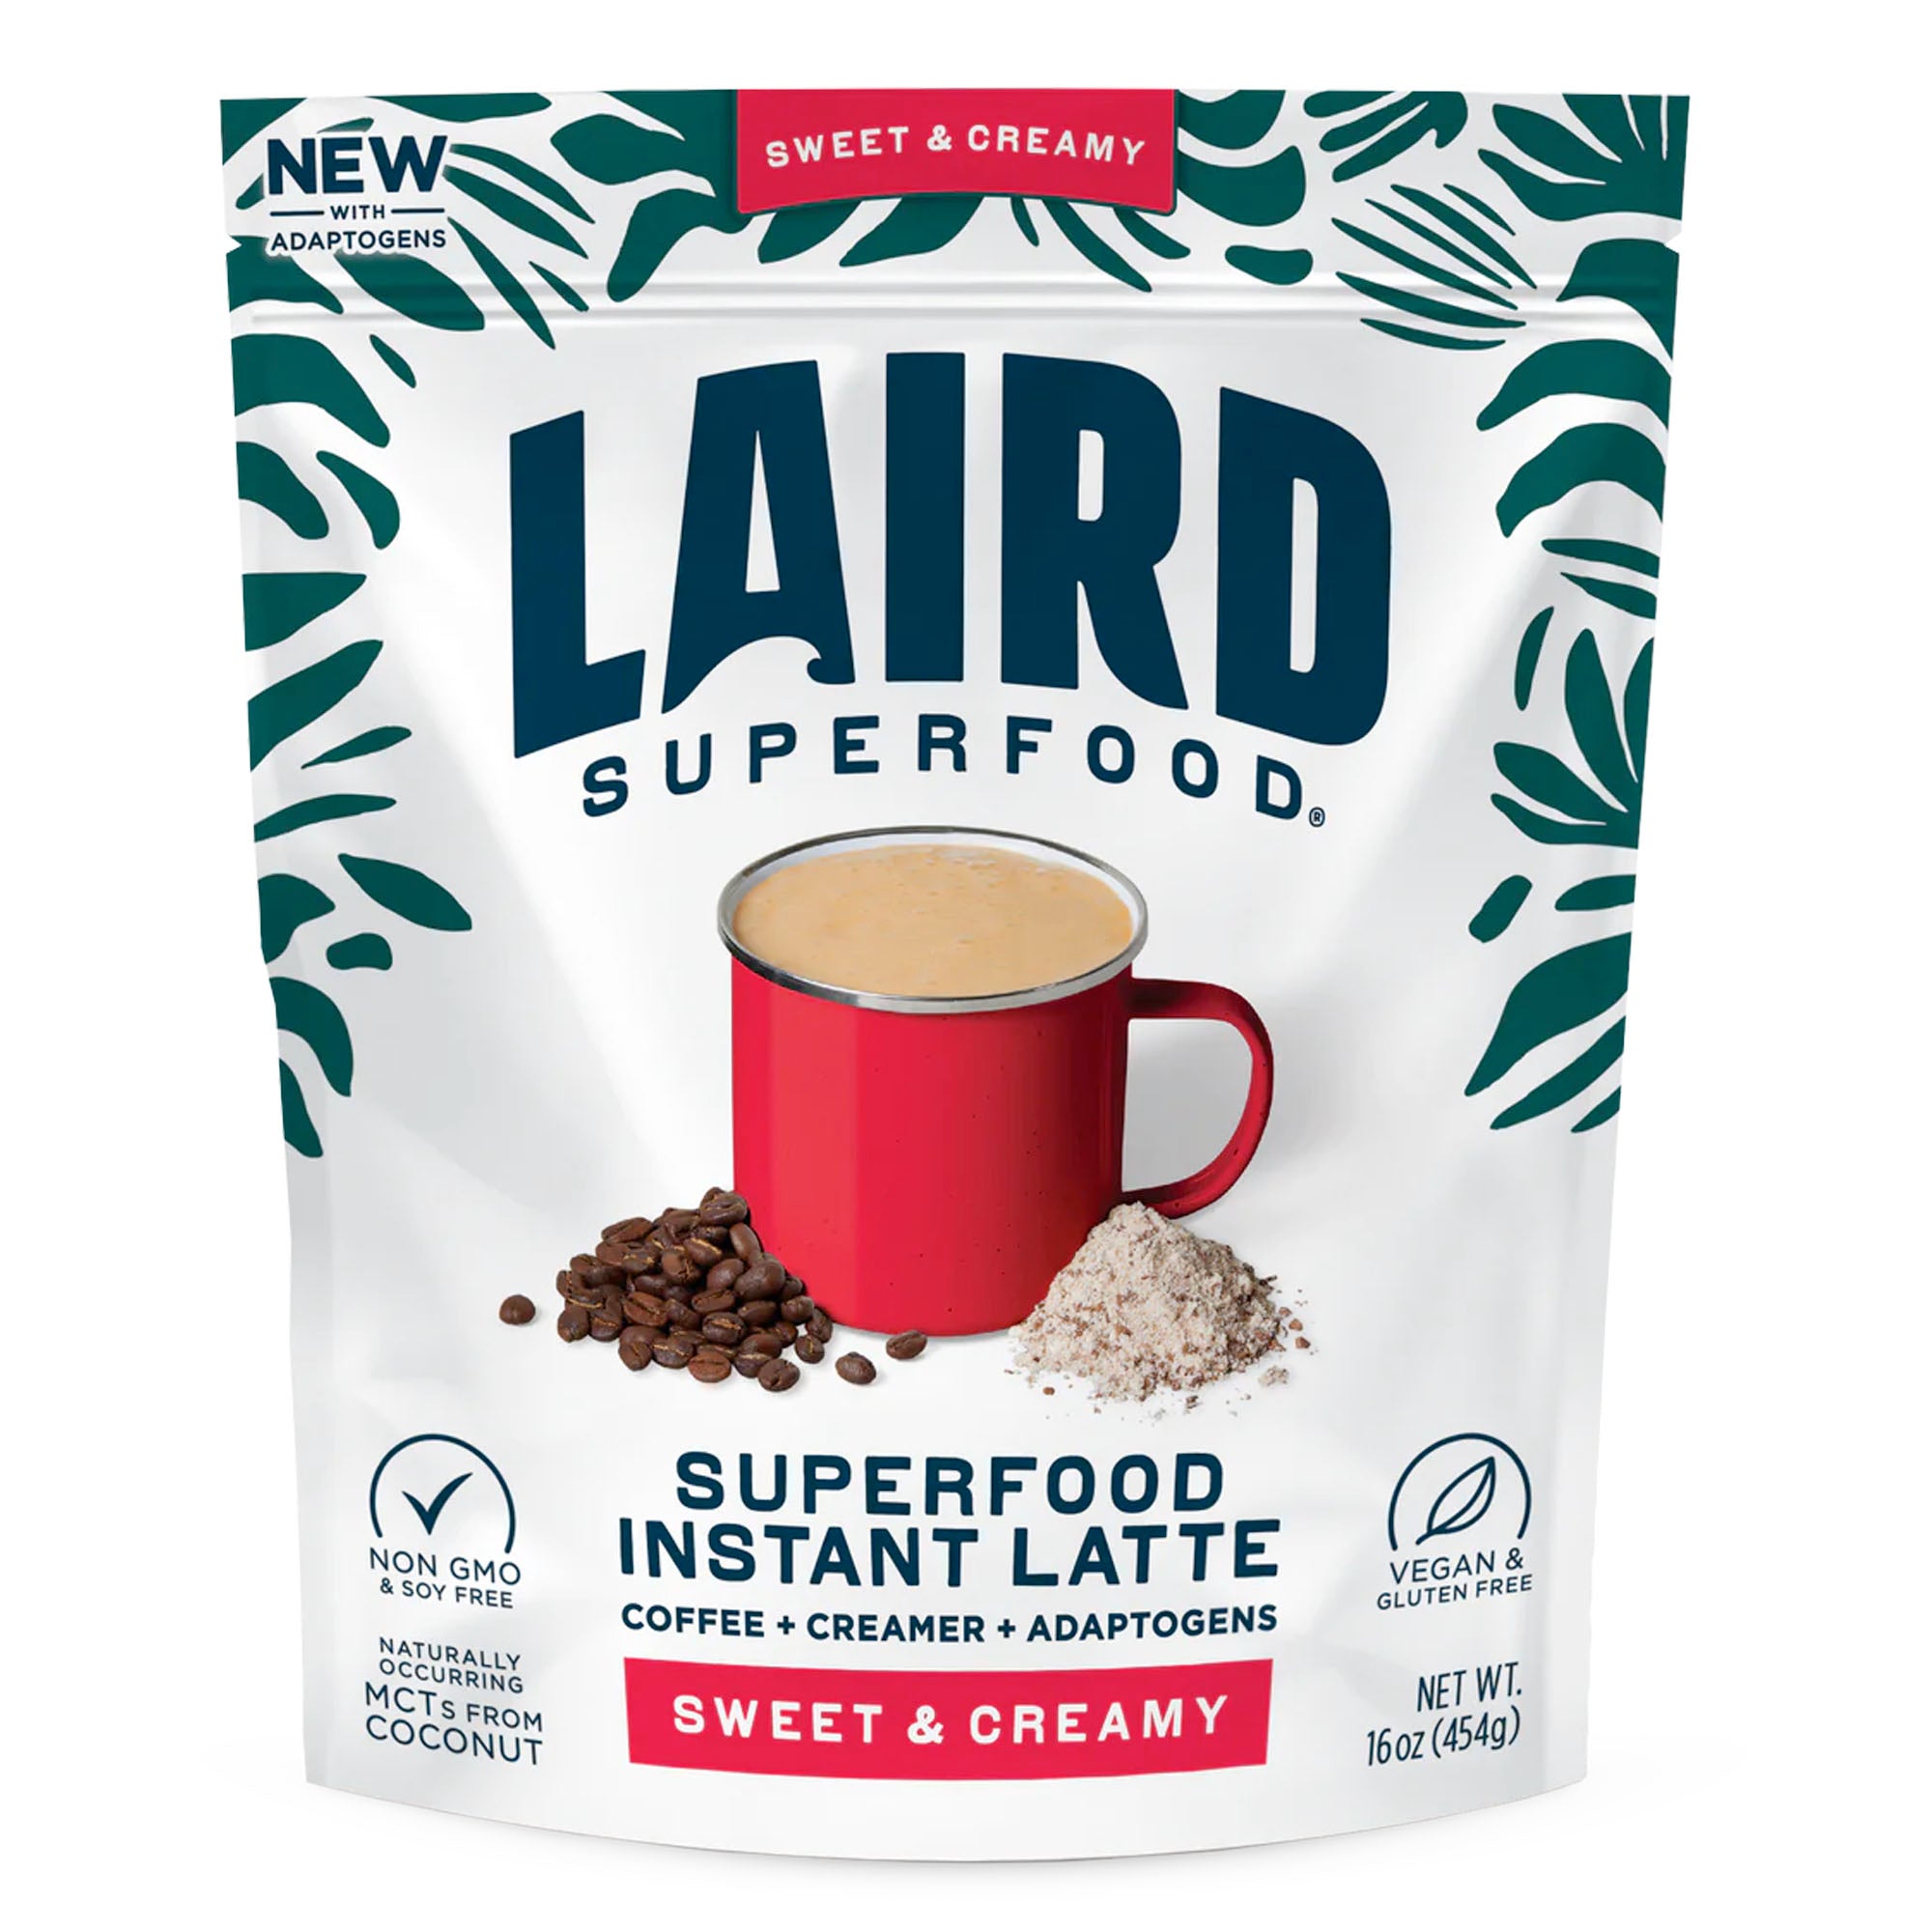 Laird Superfood Sweet & Creamy Instant Latte